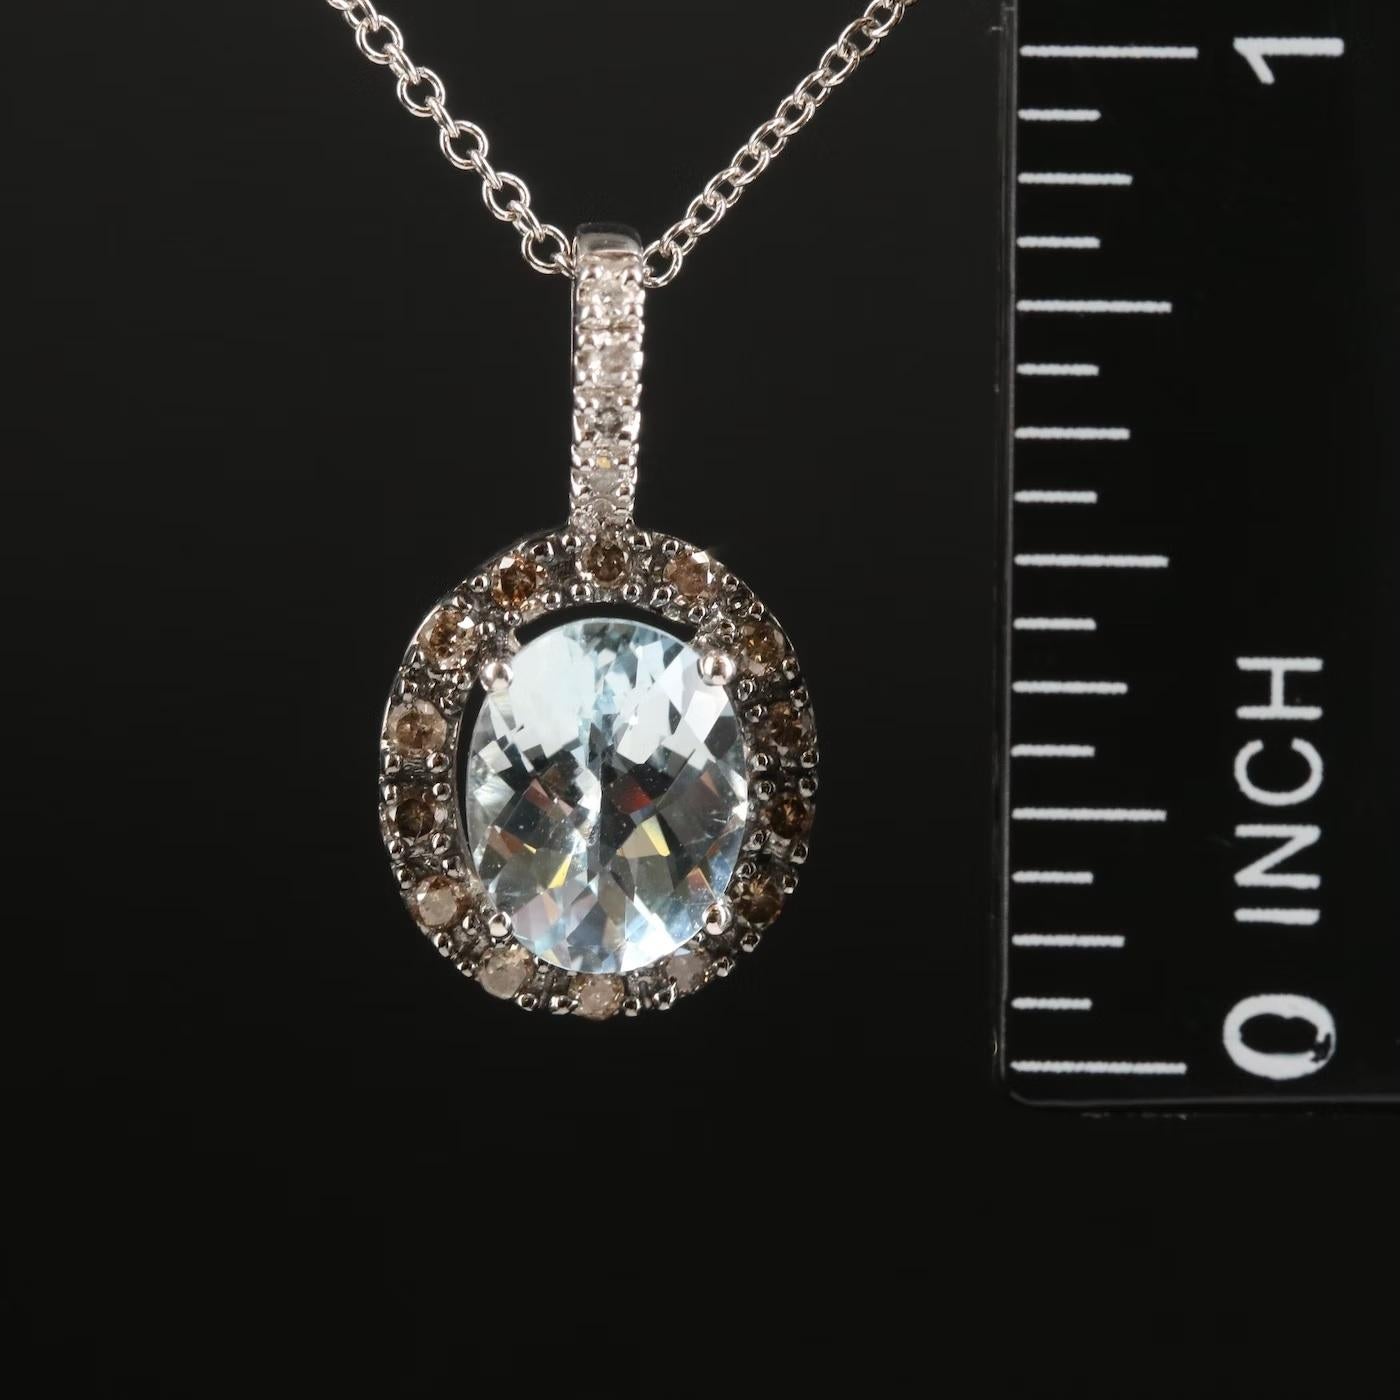 Effy 14K White Gold Aquamarine and Diamond Pendant, 2.5 TCW In New Condition For Sale In Rancho Mirage, CA